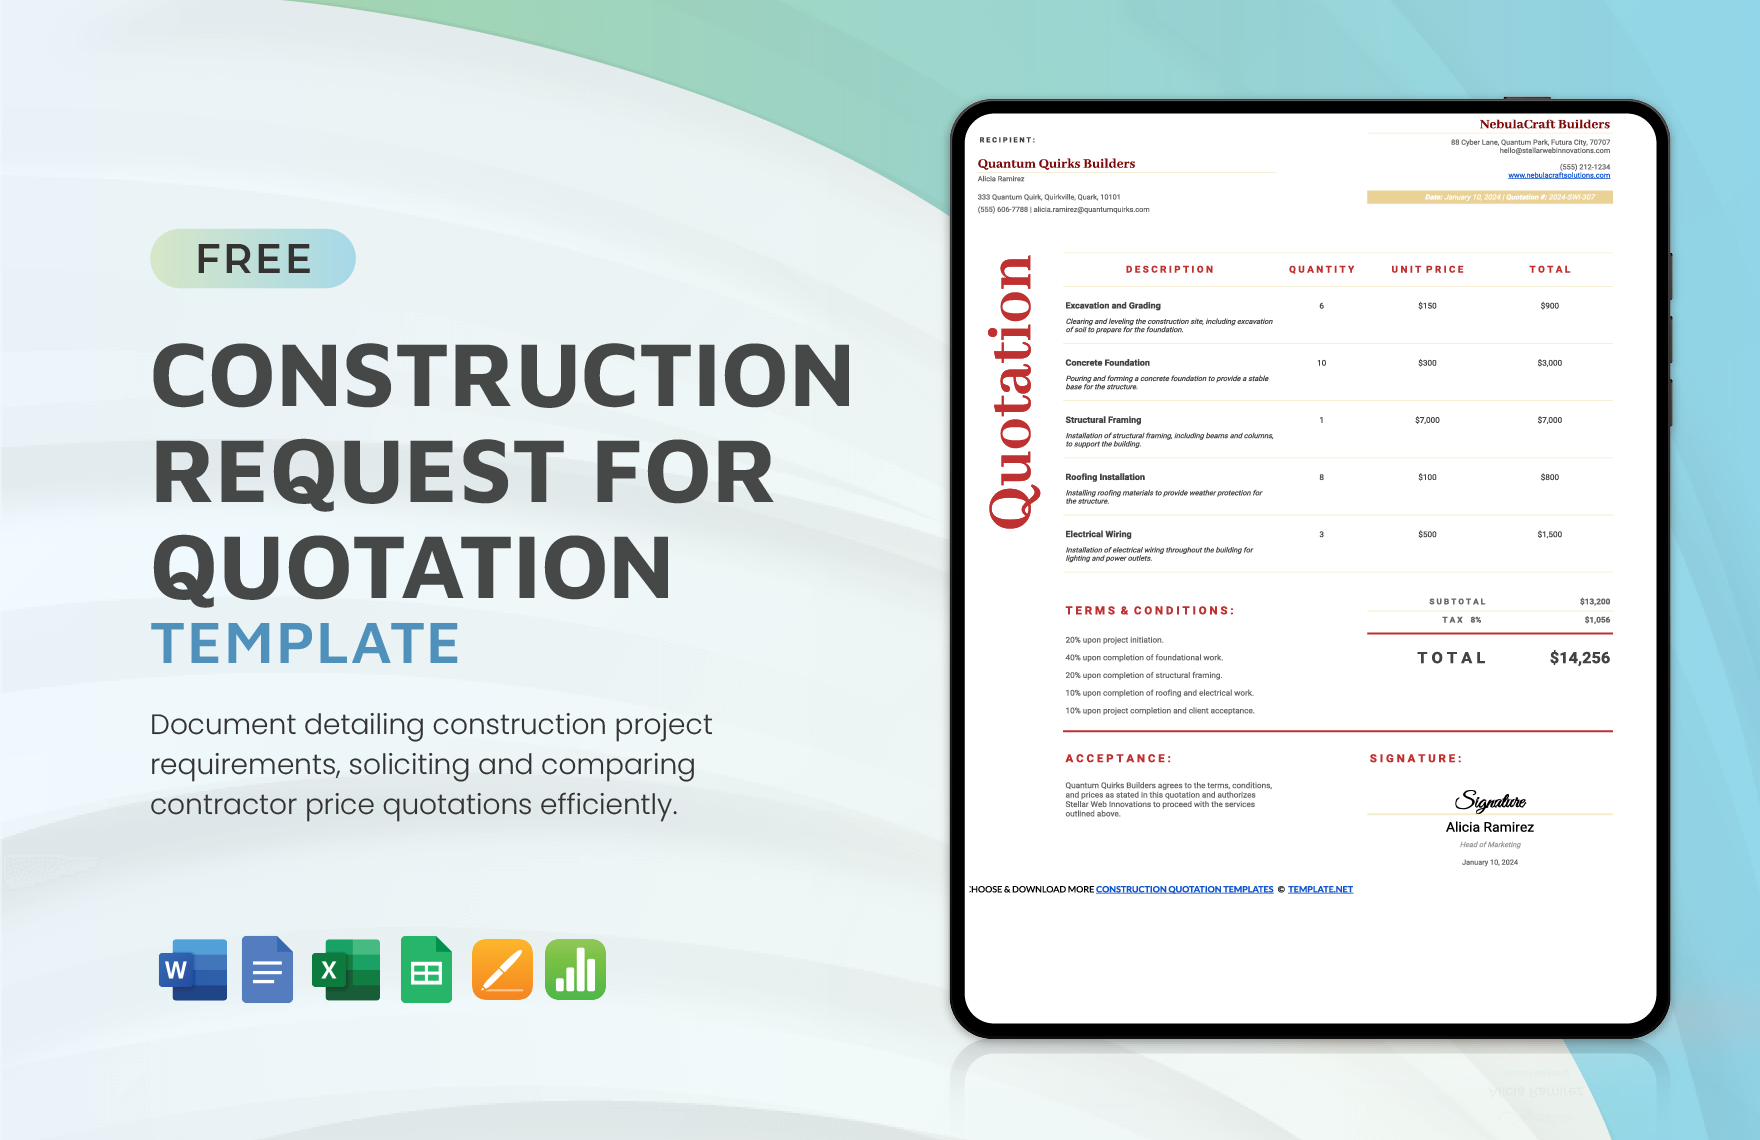 Construction Request for Quotation Template